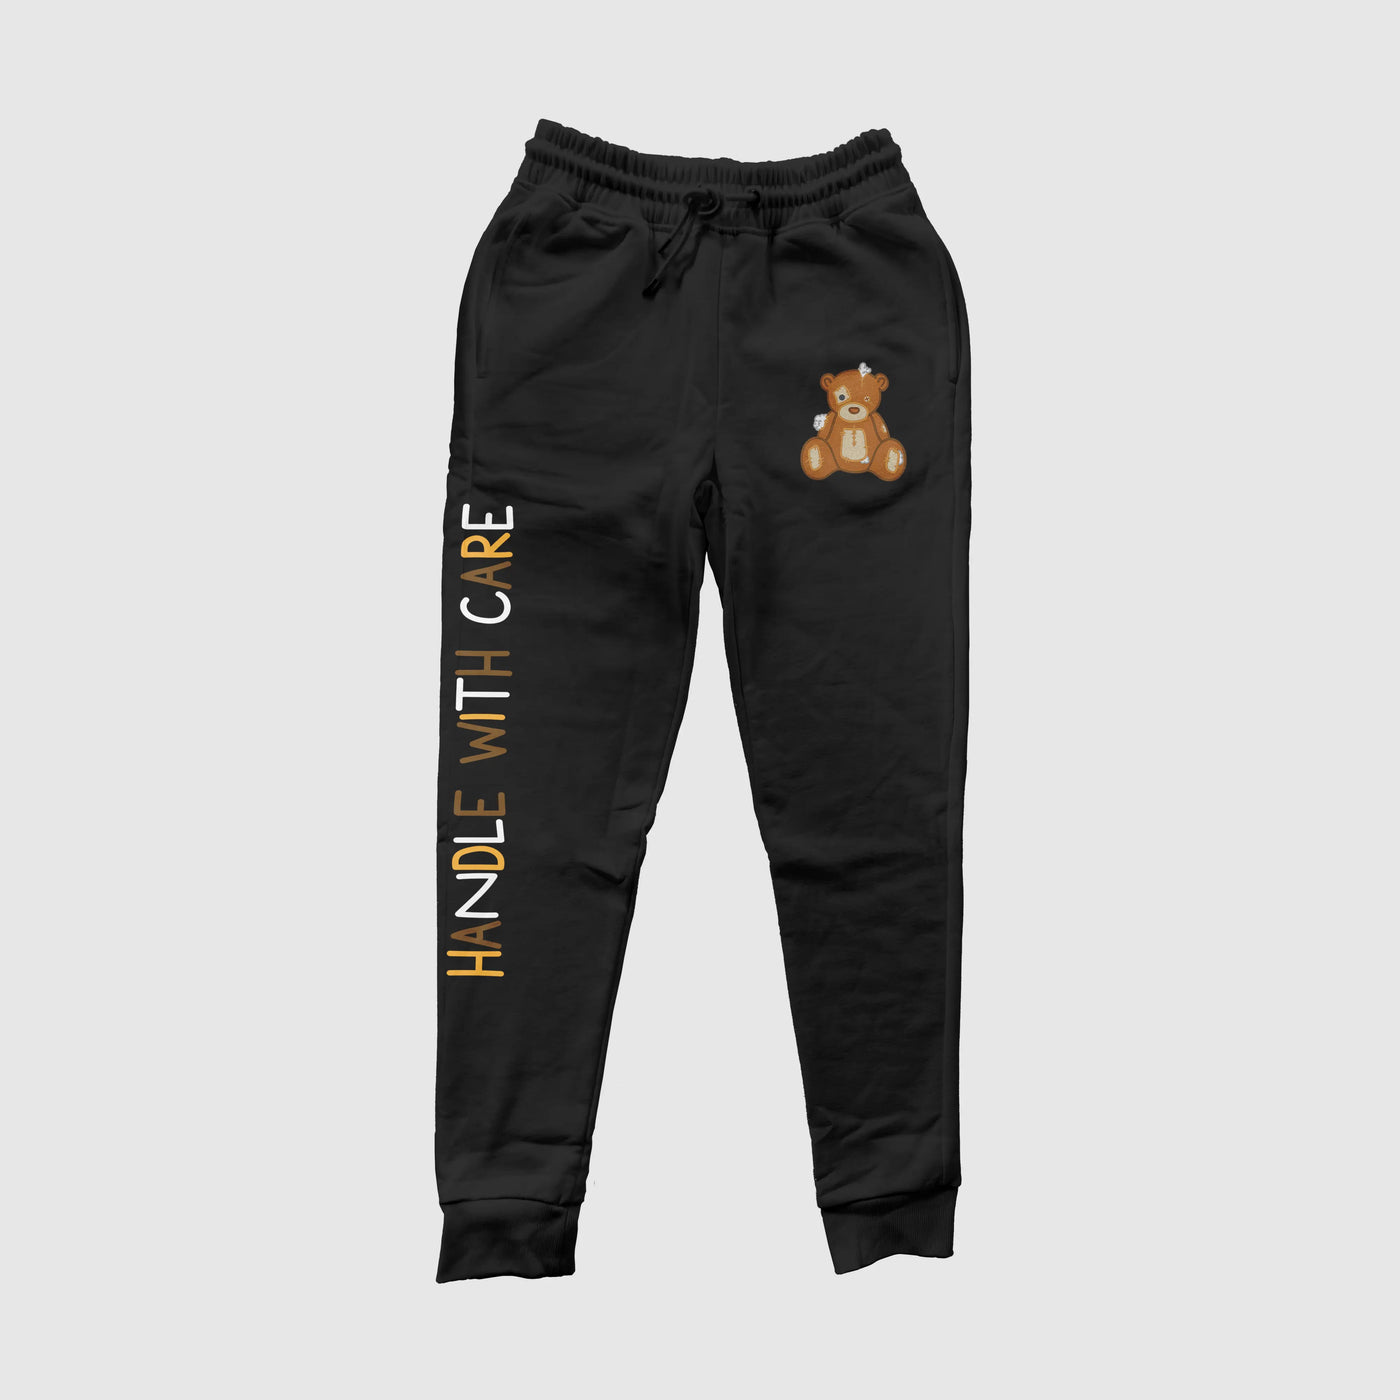 Handle With Care Black Jogger Pants





Our Handle with Care Joggers feature Patches the Dream Teddy Bear. Patches is a reminder that we're capable of overcoming anything that comes our way. It's a gDREAM Clothing 